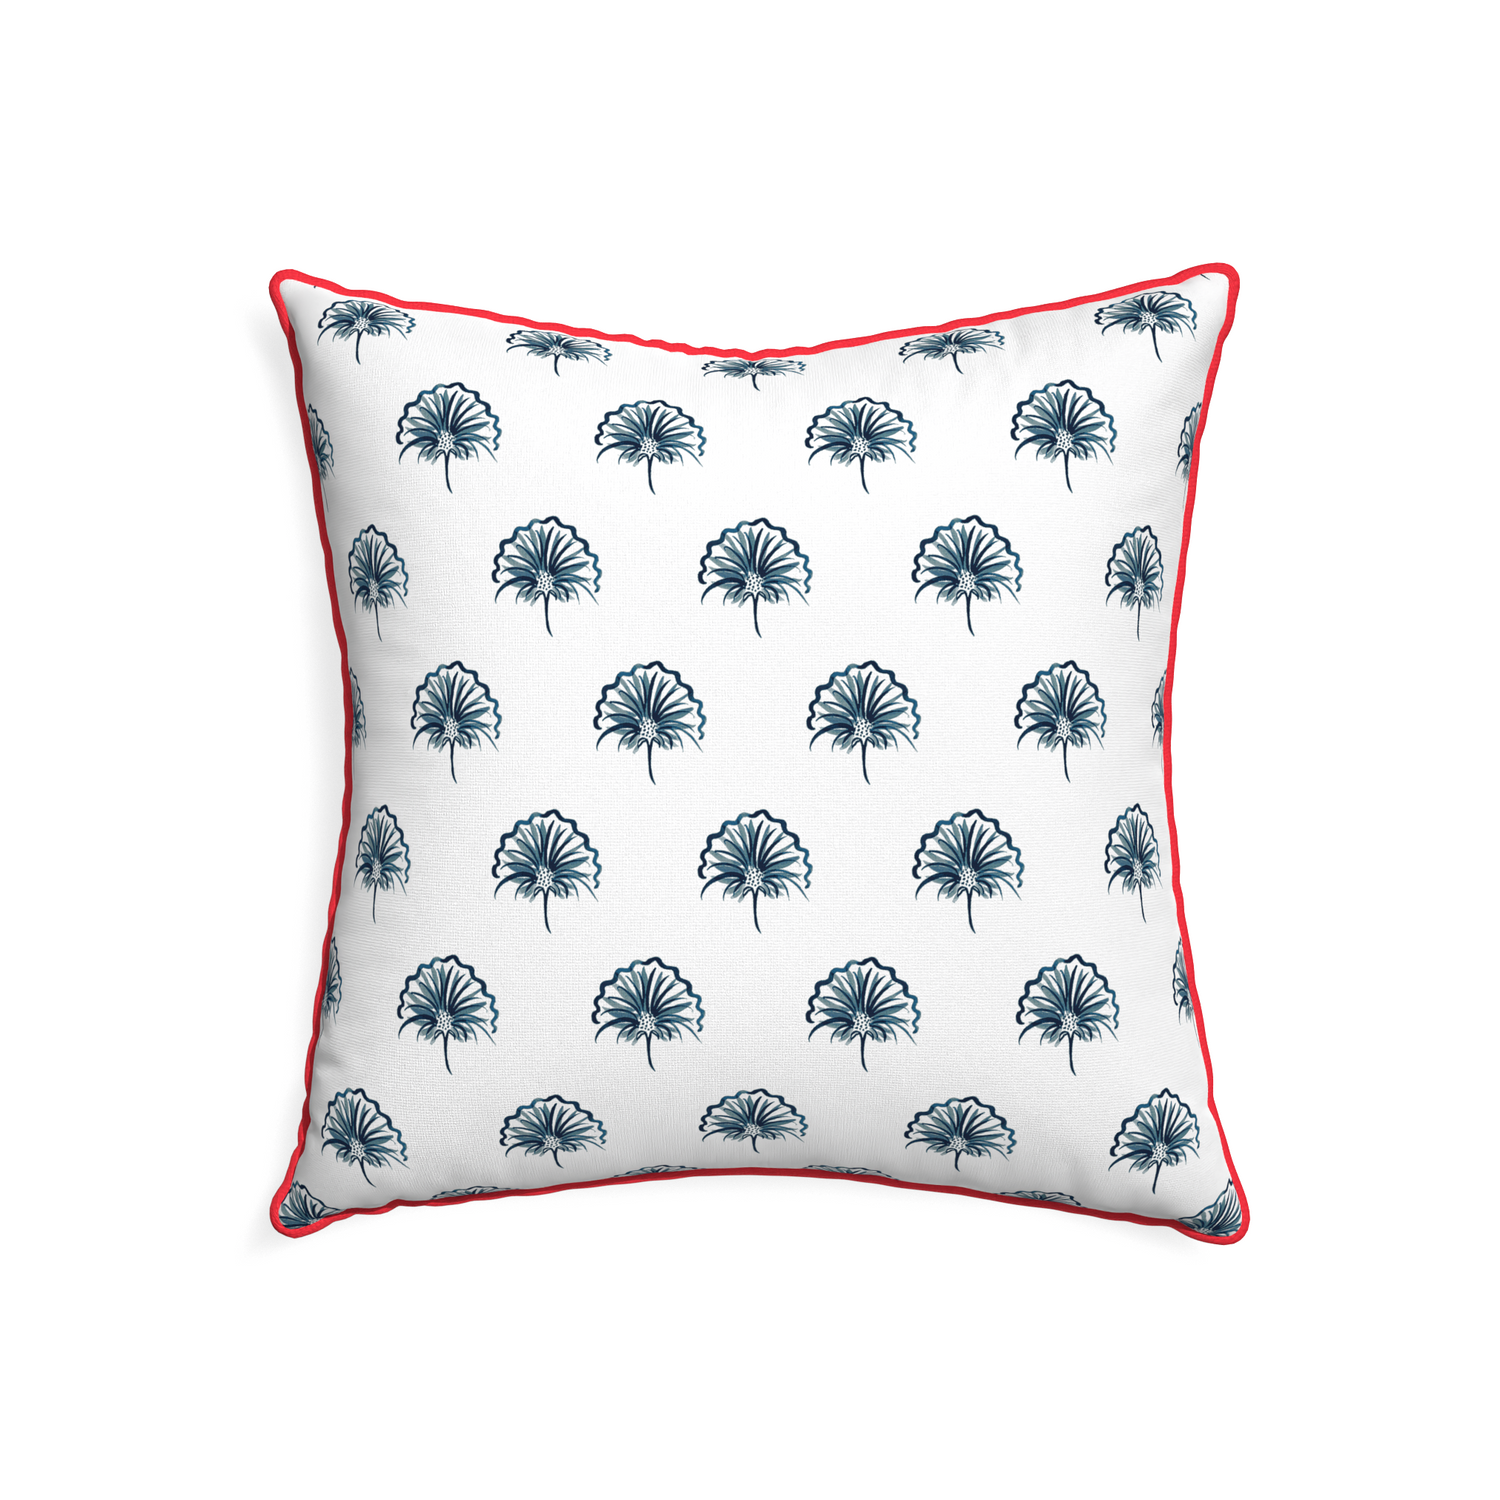 22-square penelope midnight custom floral navypillow with cherry piping on white background